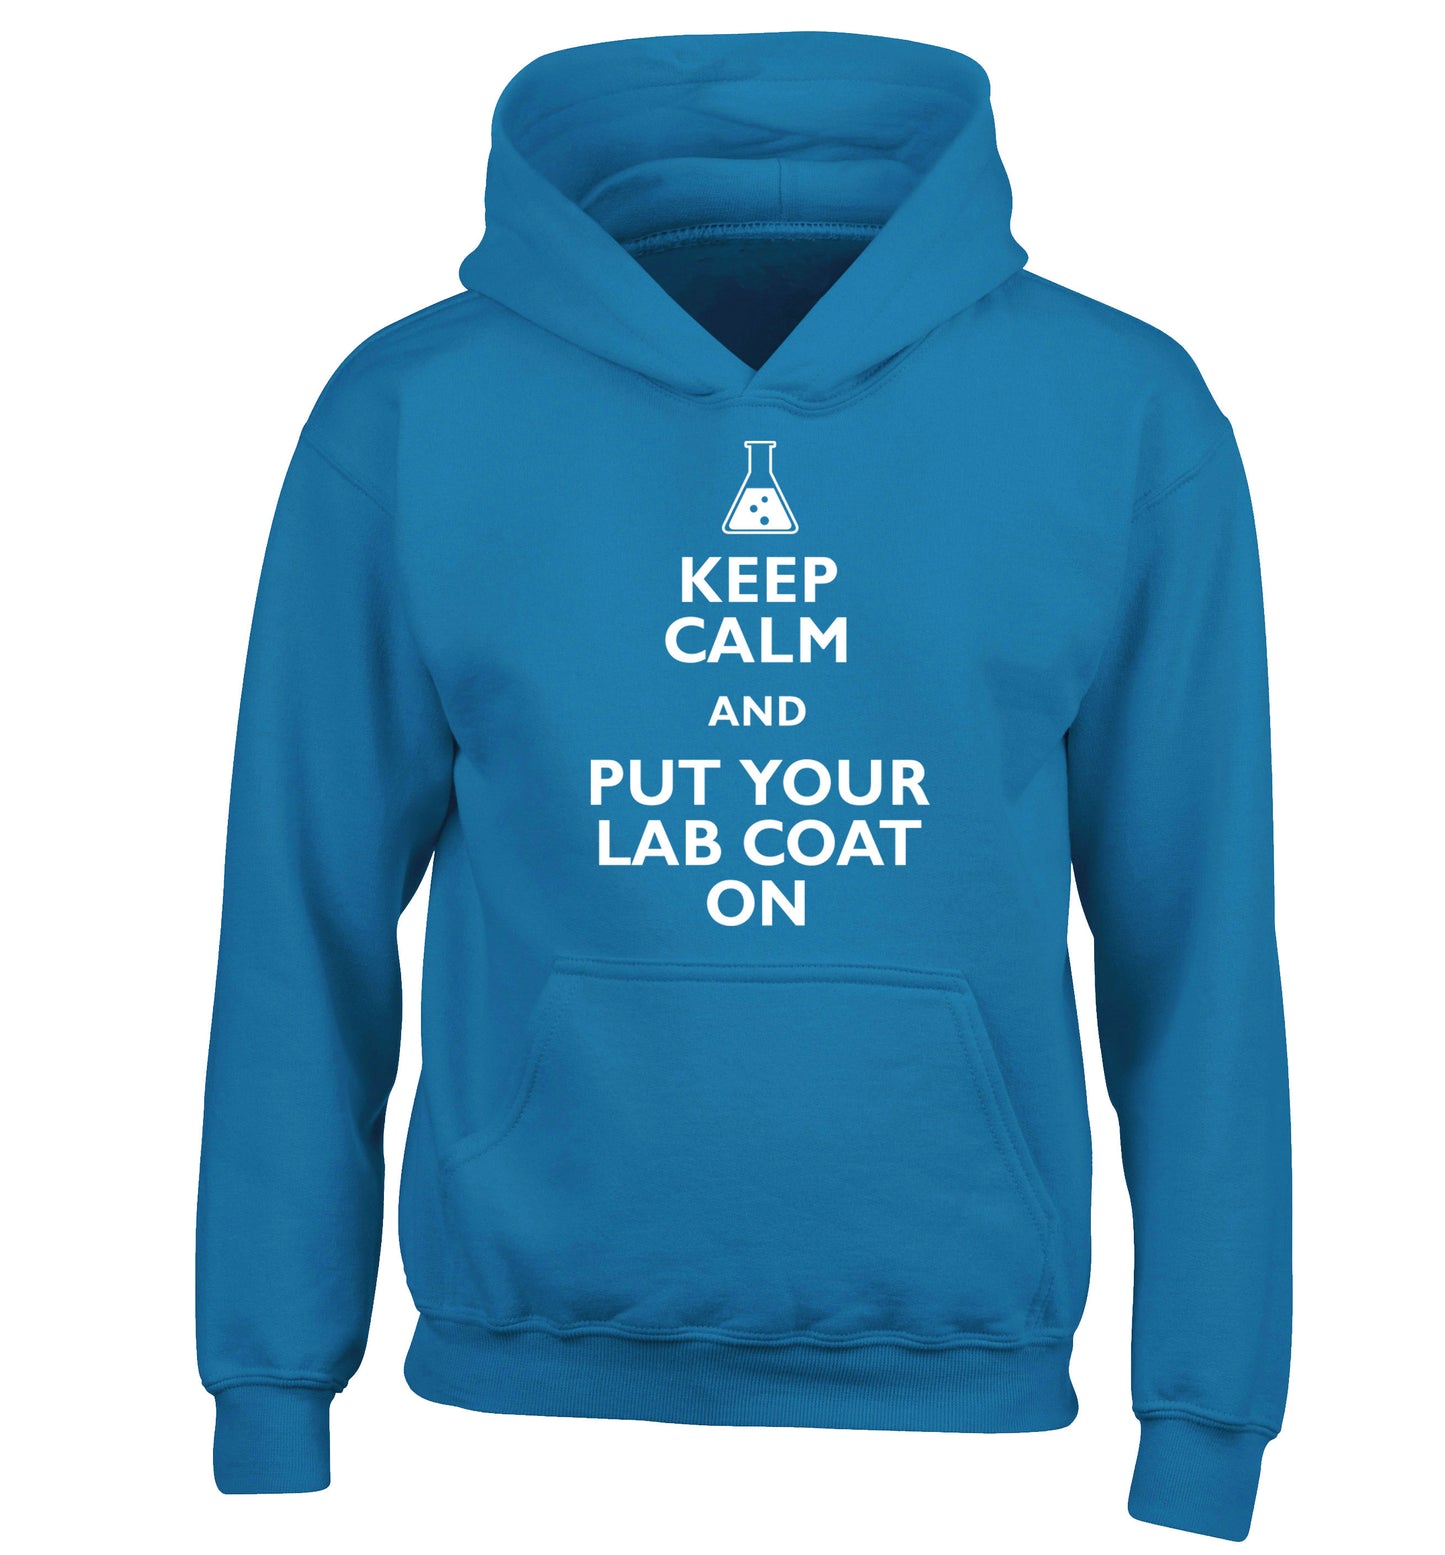 Keep calm and put your lab coat on children's blue hoodie 12-14 Years